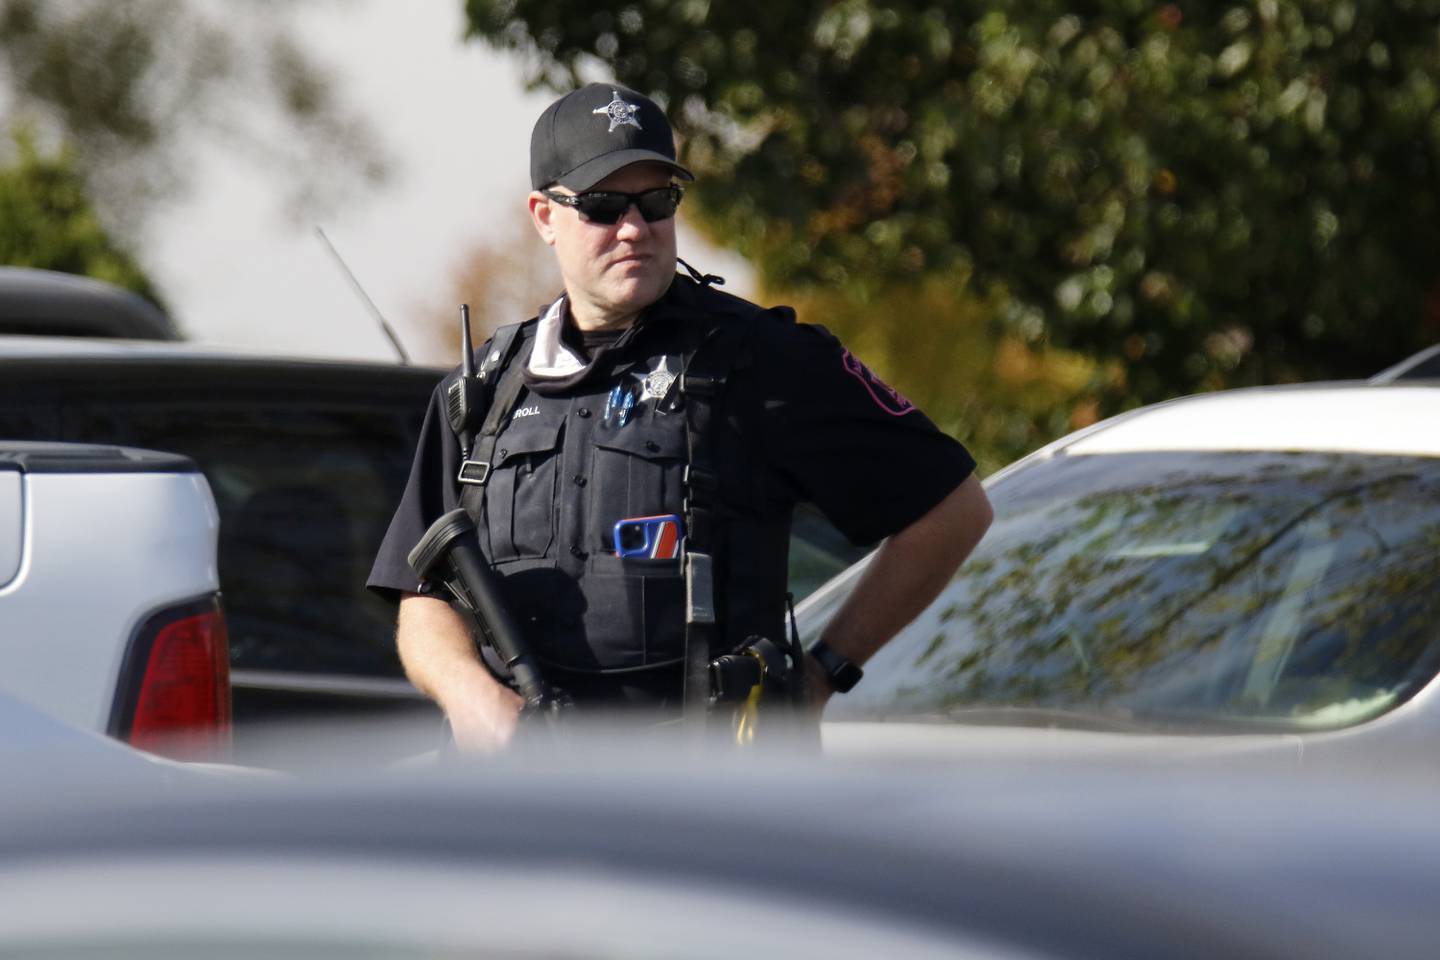 Police, sheriff's deputies, and law enforcement in SWAT gear were on hand to handle a situation Wednesday, Oct. 27, 2021, at the Holiday Inn Express across from Jacobs High School in Algonquin.